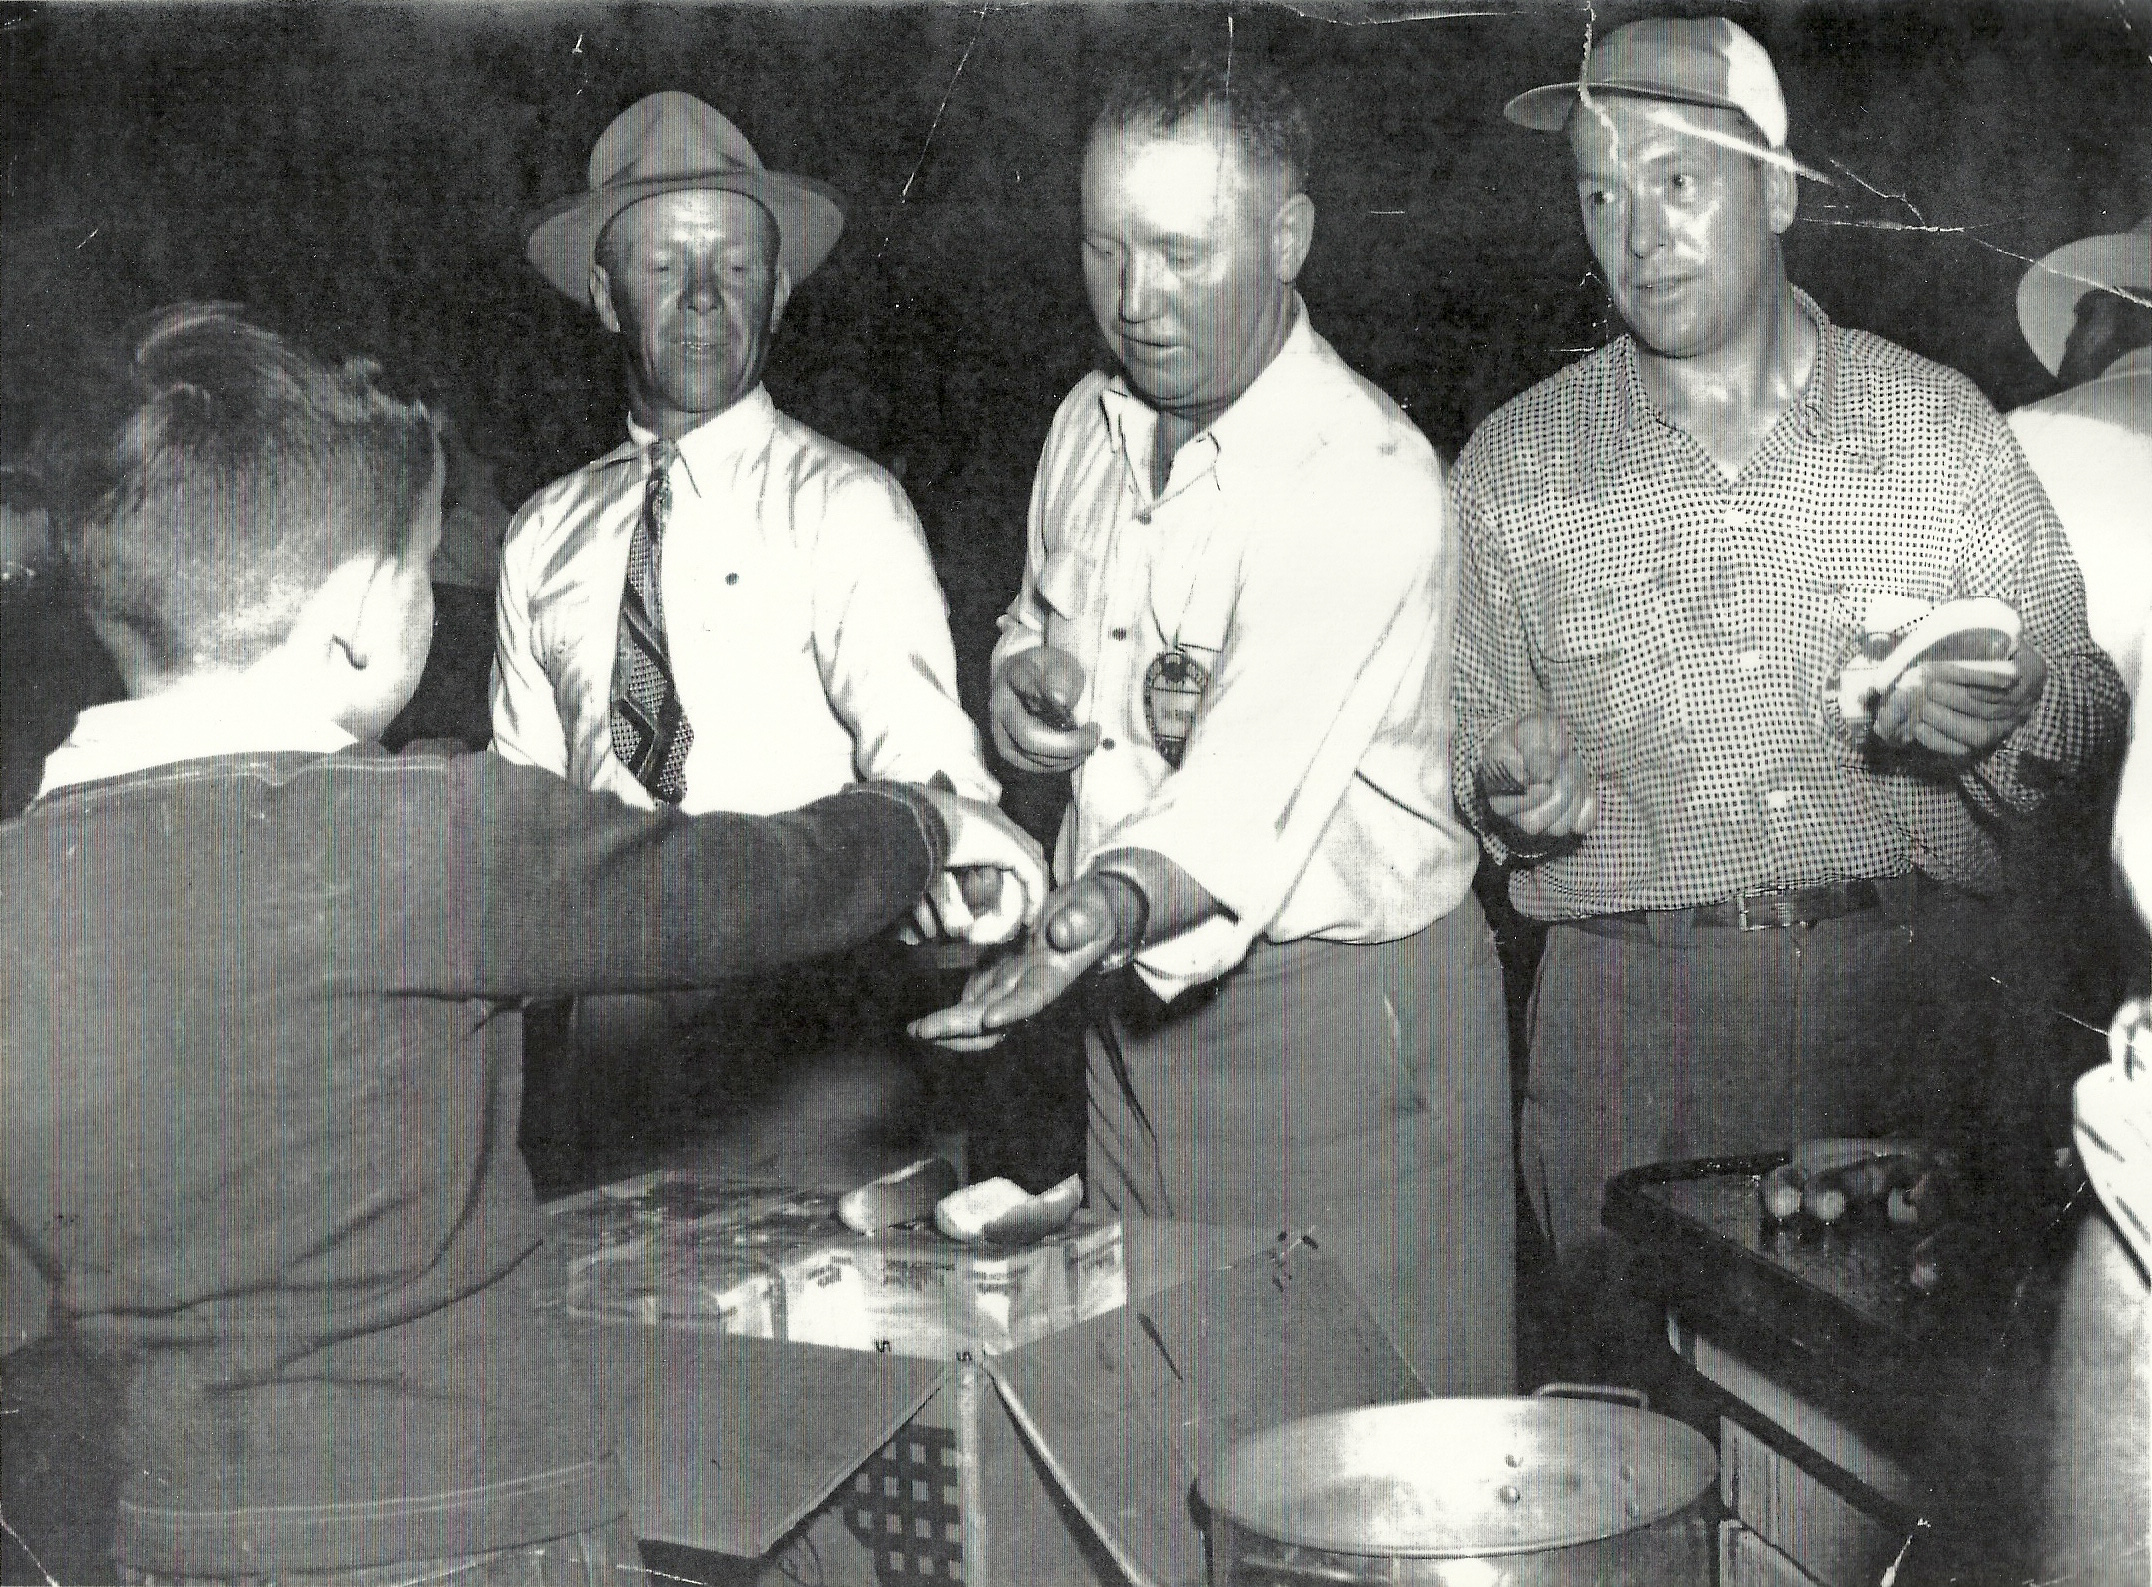  Boy serving hot dogs at an unknown event. 